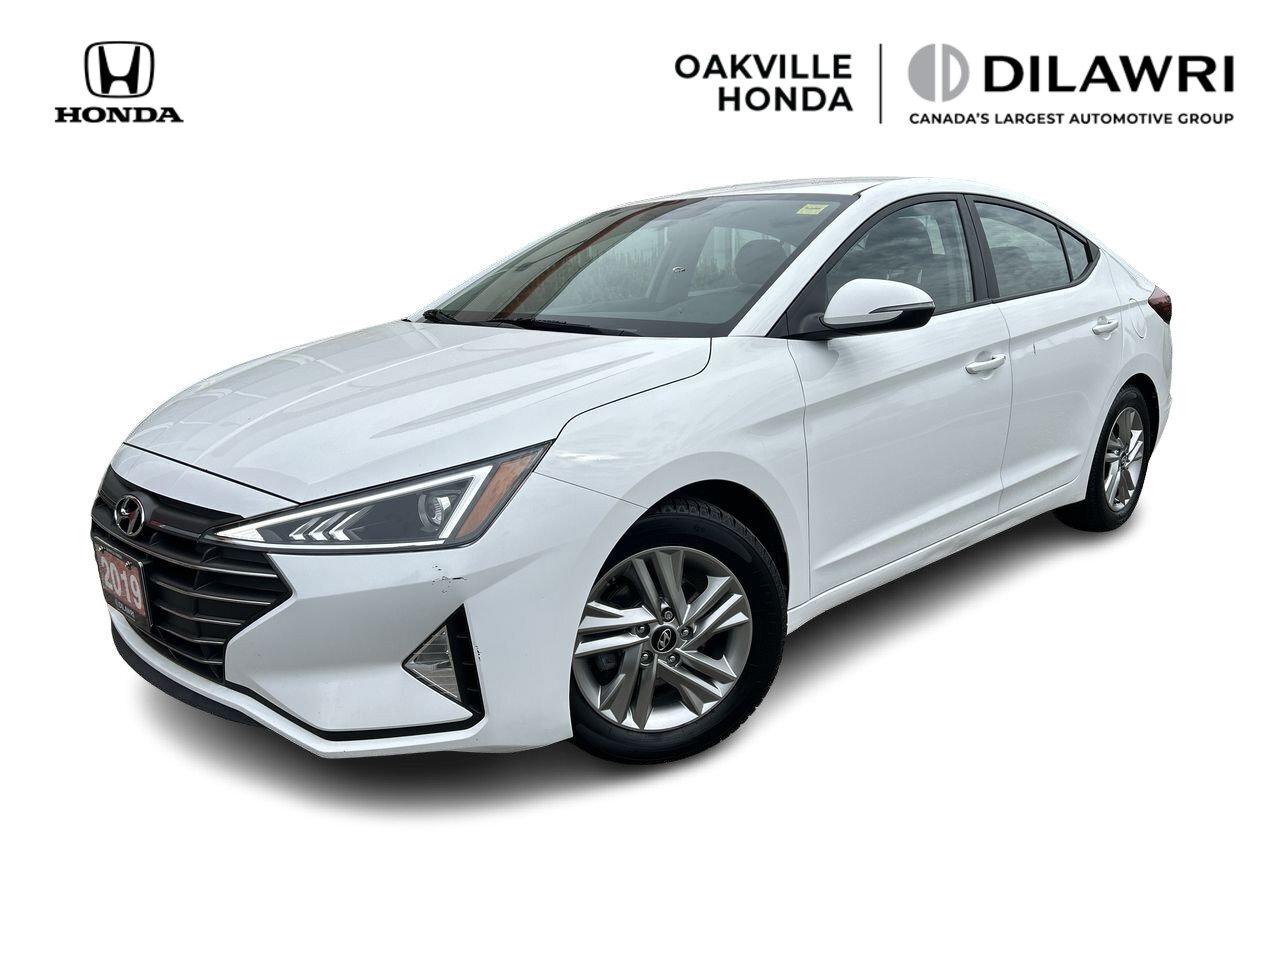 2019 Hyundai Elantra GT Preferred at GT | LOW KMS | MINT CONDITION / 